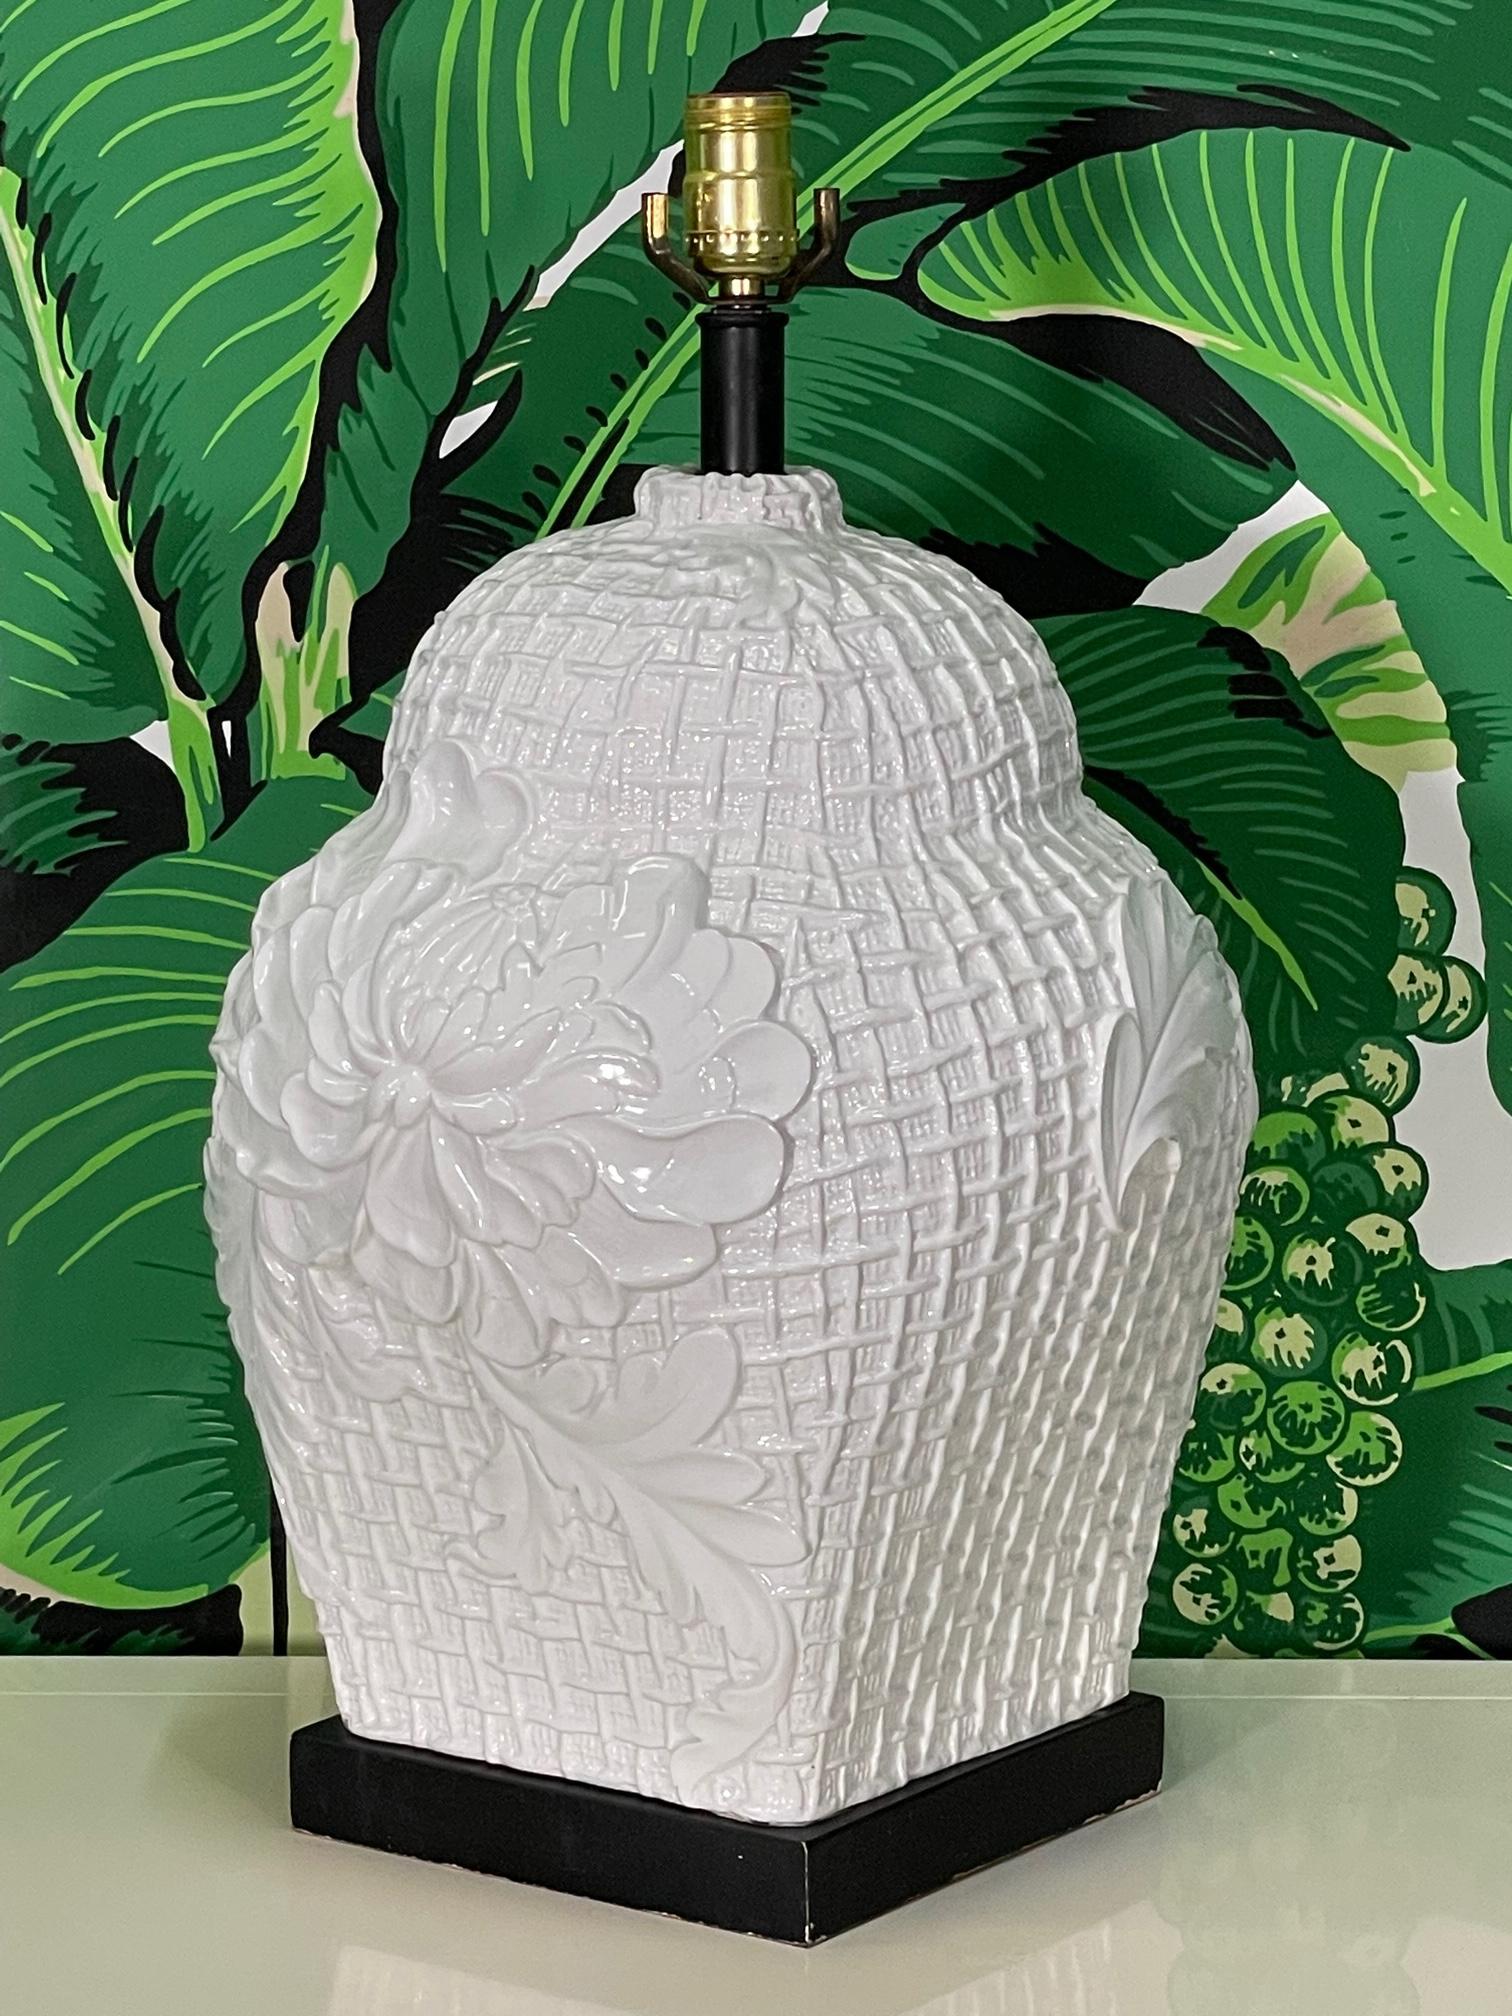 Ceramic ginger jar style table lamp features a faux wicker and floral relief of acanthus leaves and blooms. Sits on metal plinth. Good condition with only minor imperfections consistent with age, see photos for condition details.
For a shipping